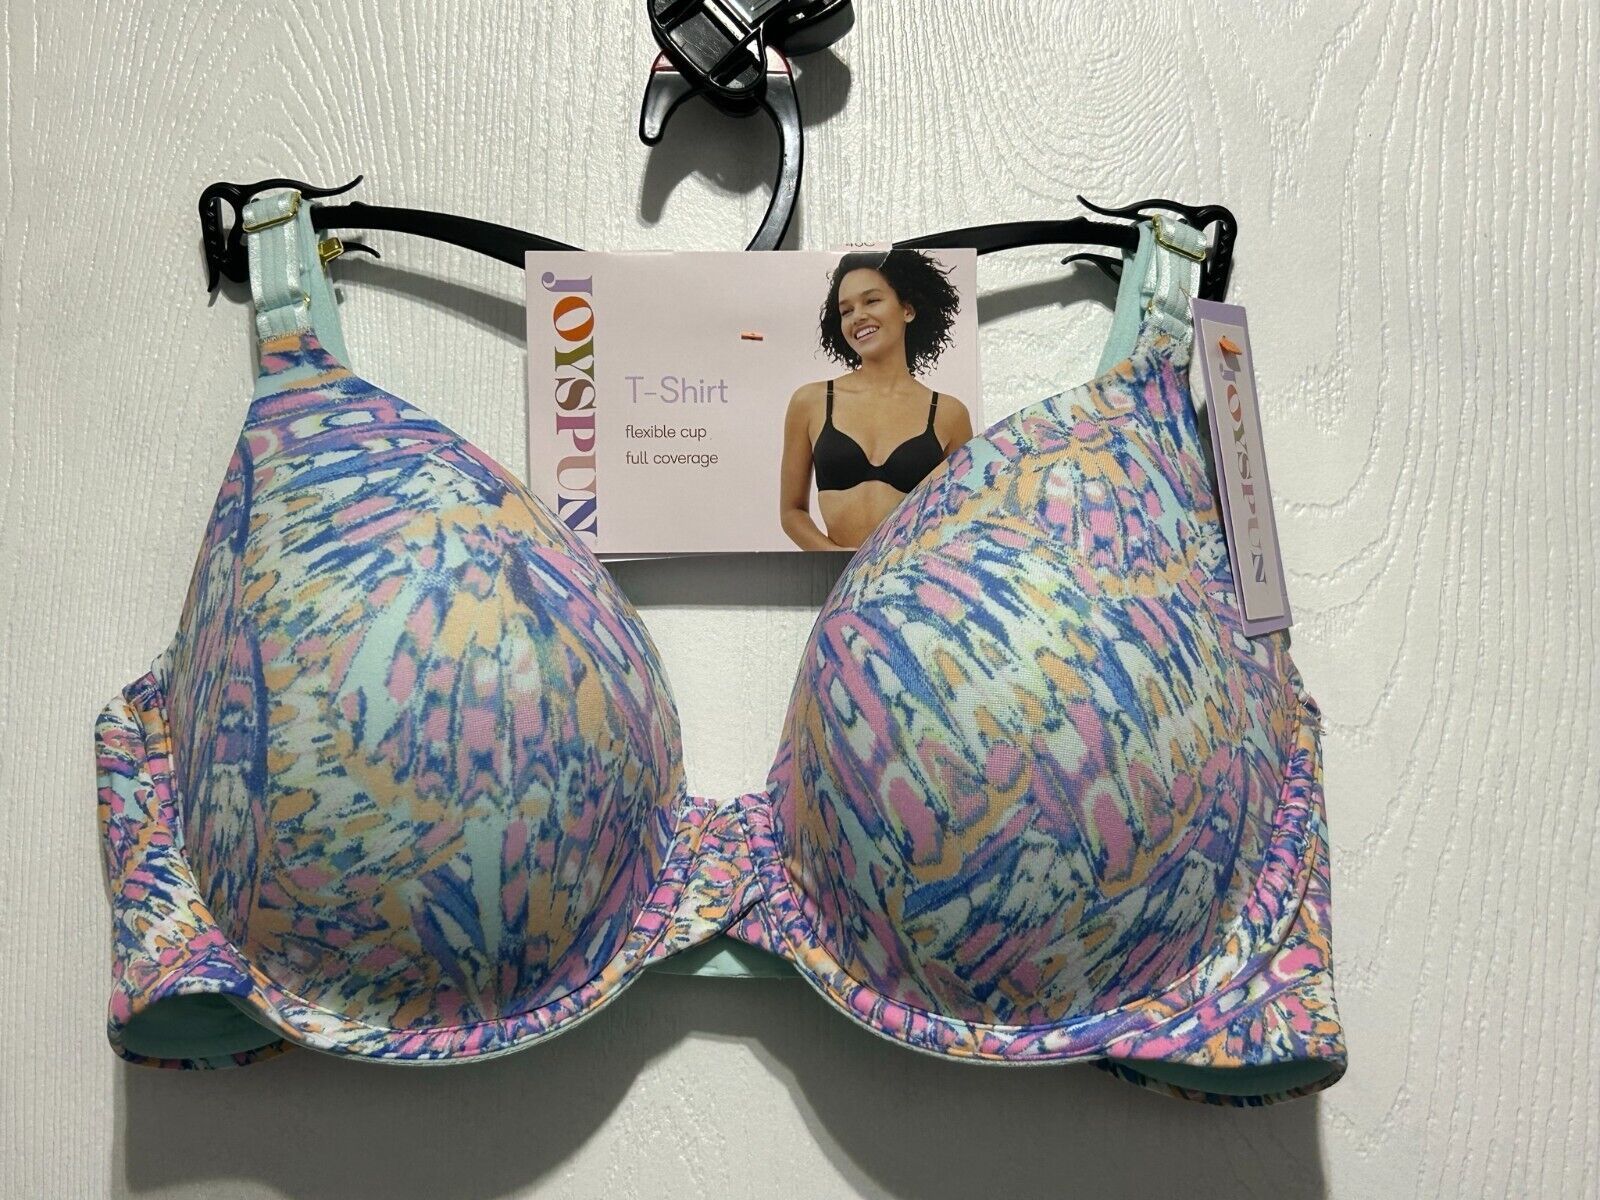 NWT ANNE KLEIN 2-Pack T-SHIRT Bra Set Two Gray and Soft Pink